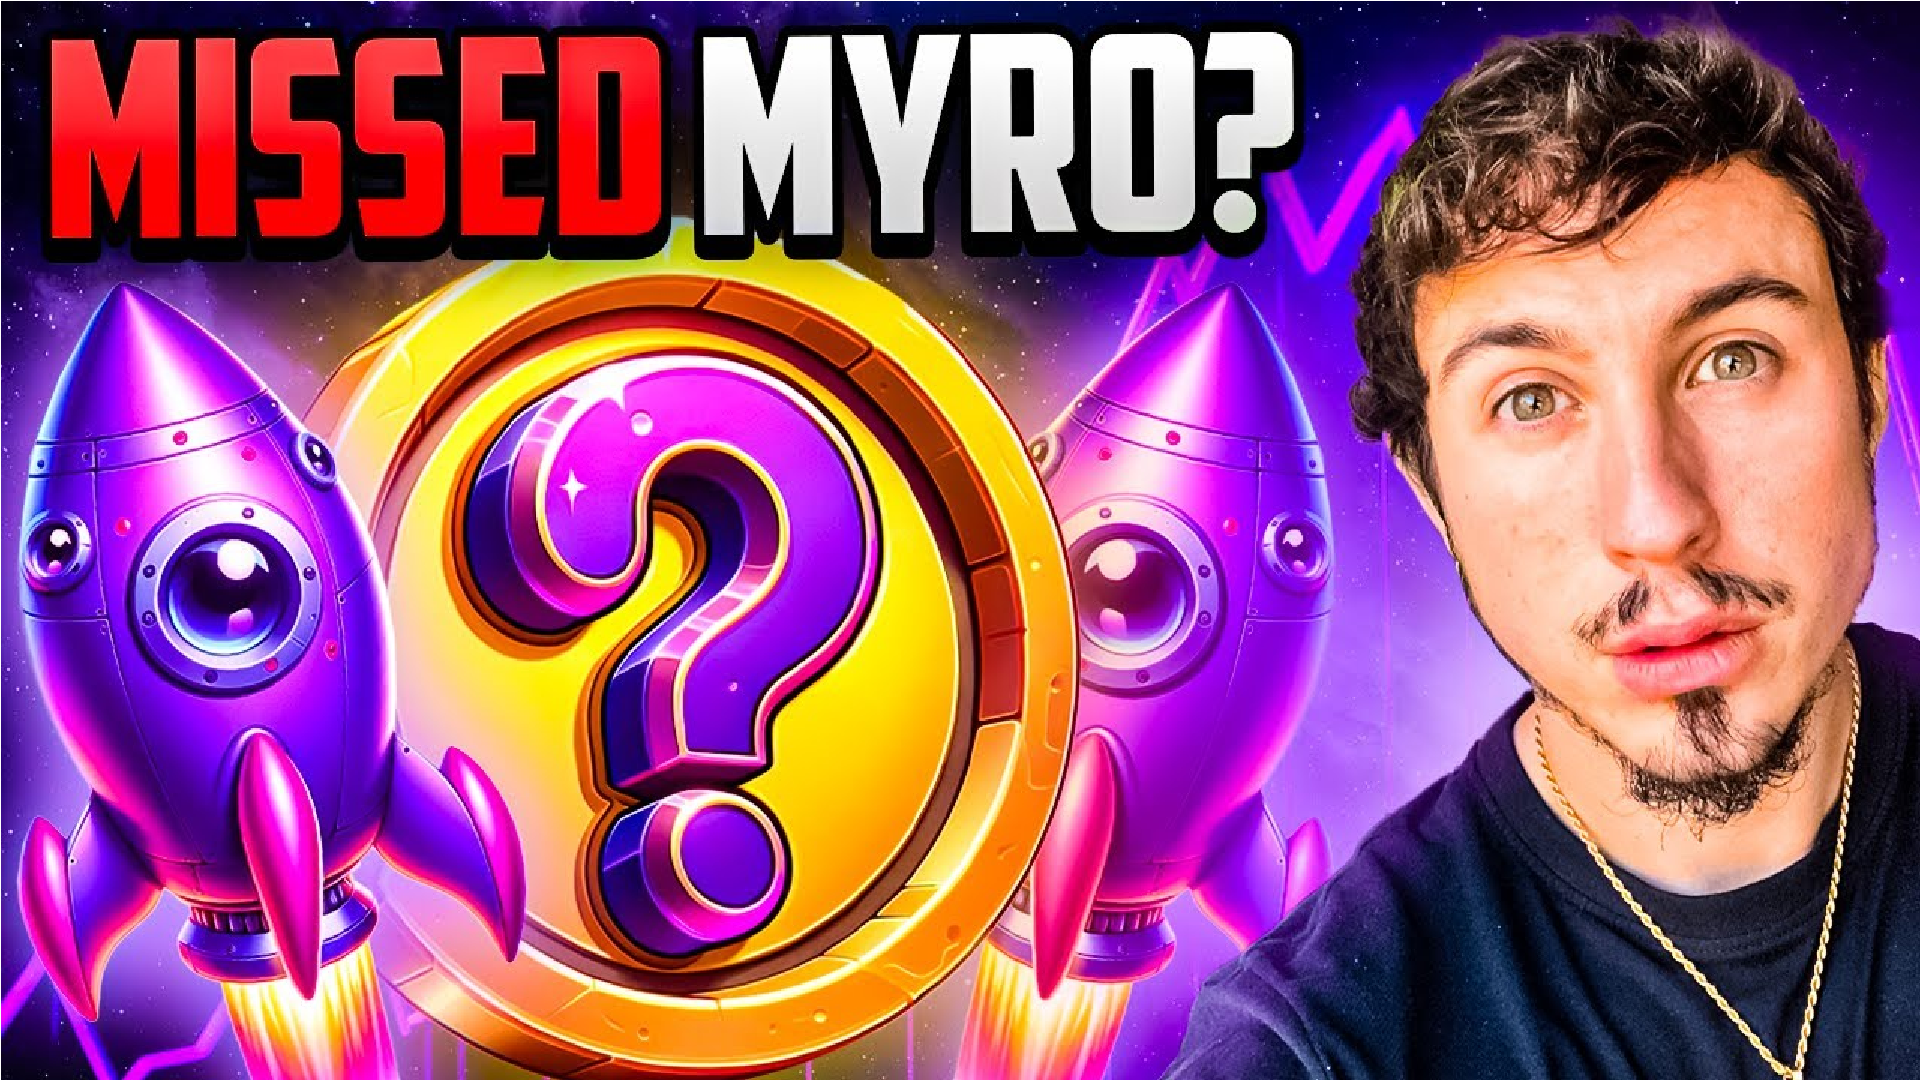 Myro's 30% Drop Sparks Investor Interest in This New GameFi Crypto as a High-Potential Alternative